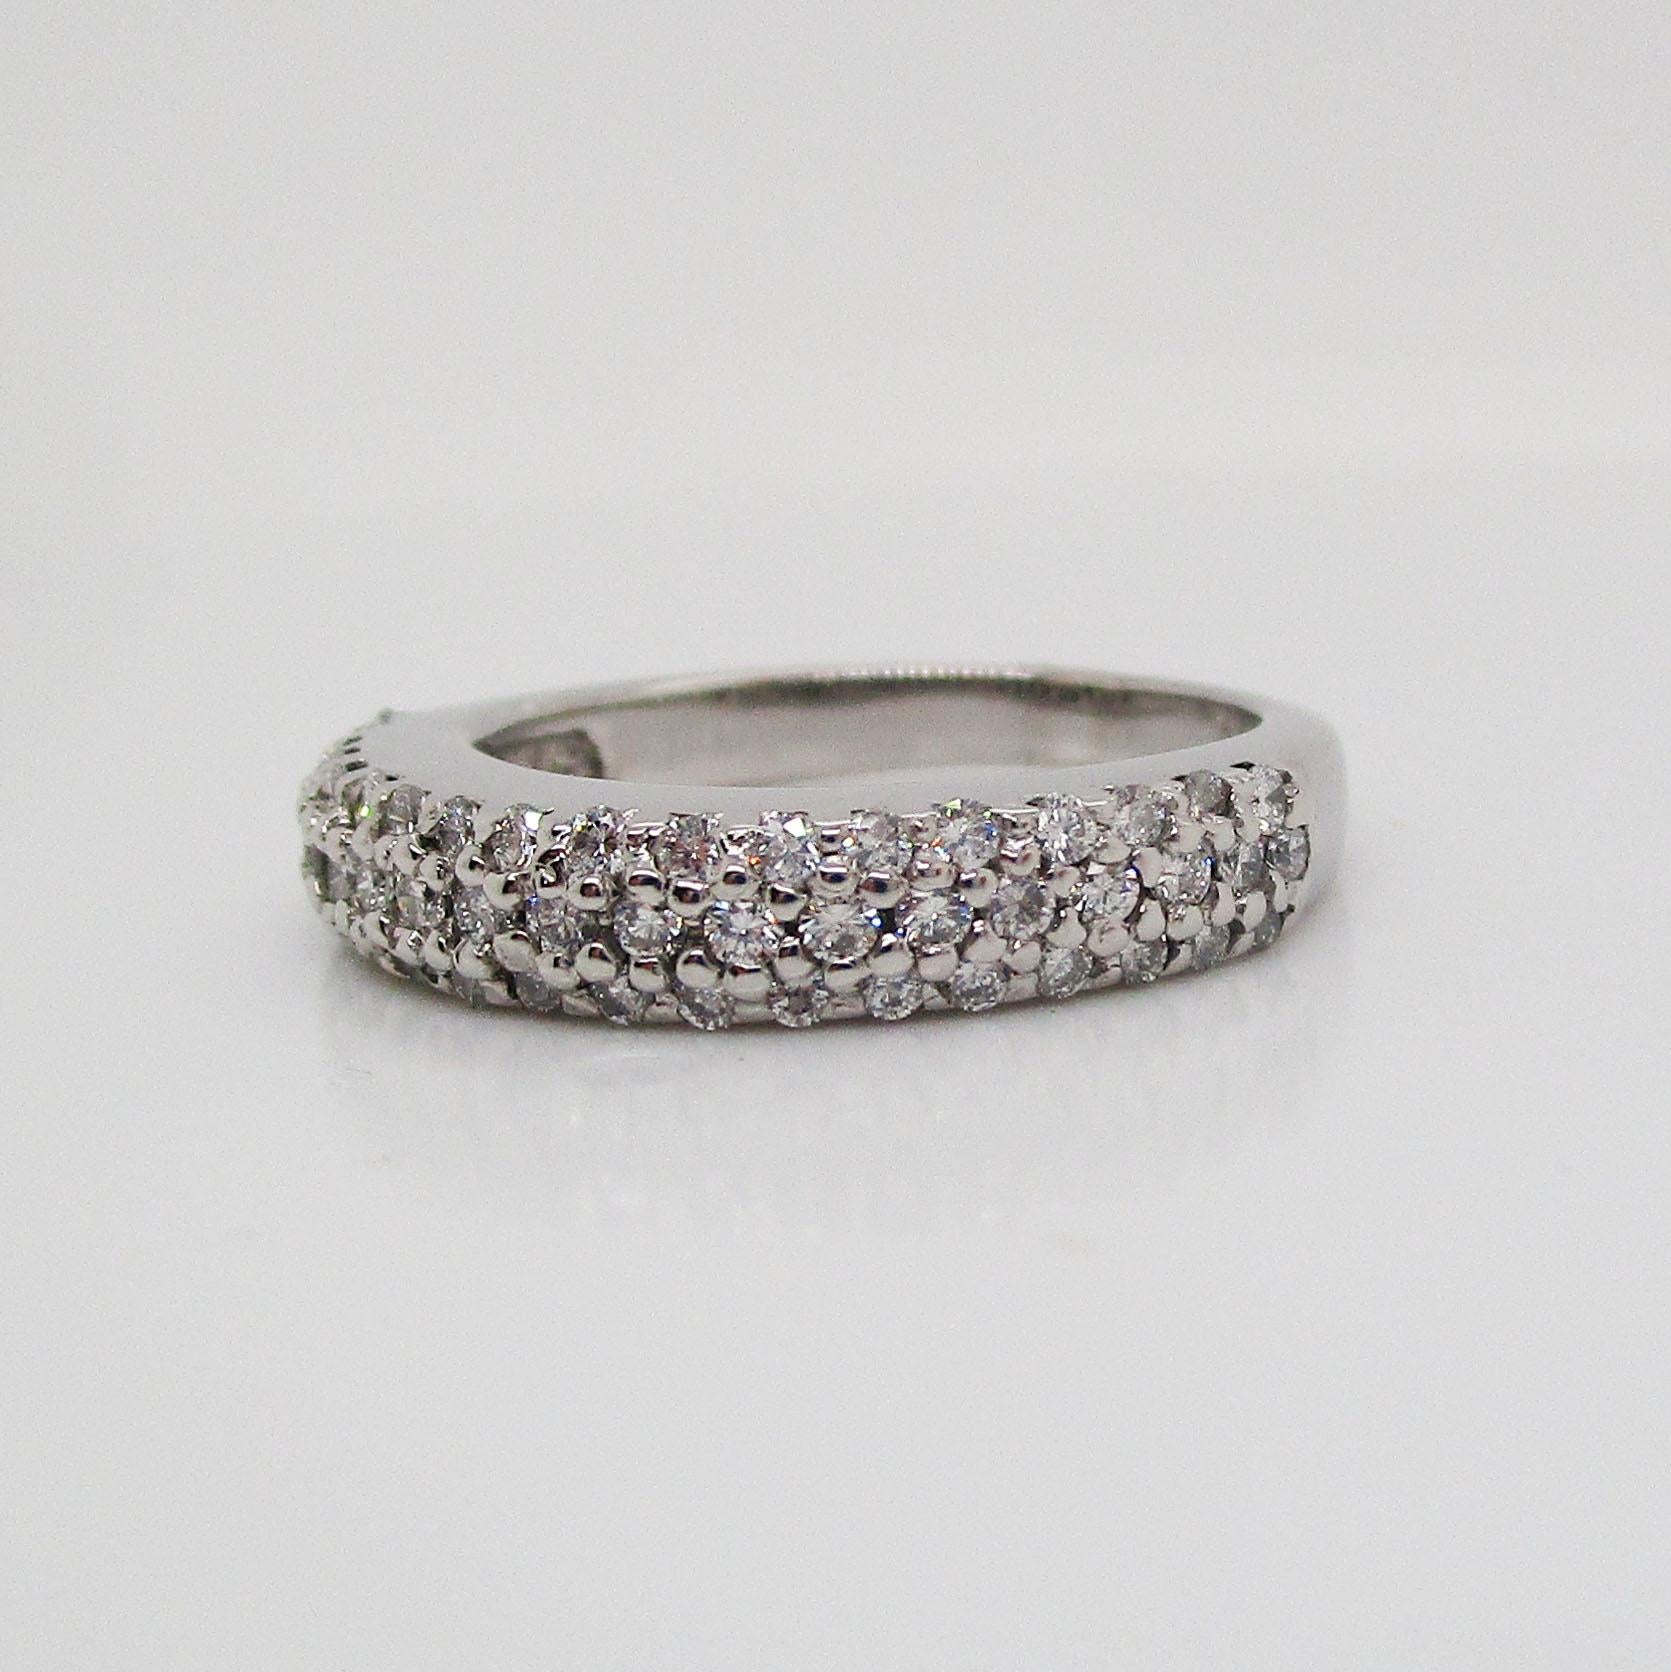 This is a beautiful classic band in 14k white gold with a stunning array of brilliant white diamonds set in an almost pave style. The band is a half-band, meaning the stones are only set on the front half of the ring and the diamonds are always face